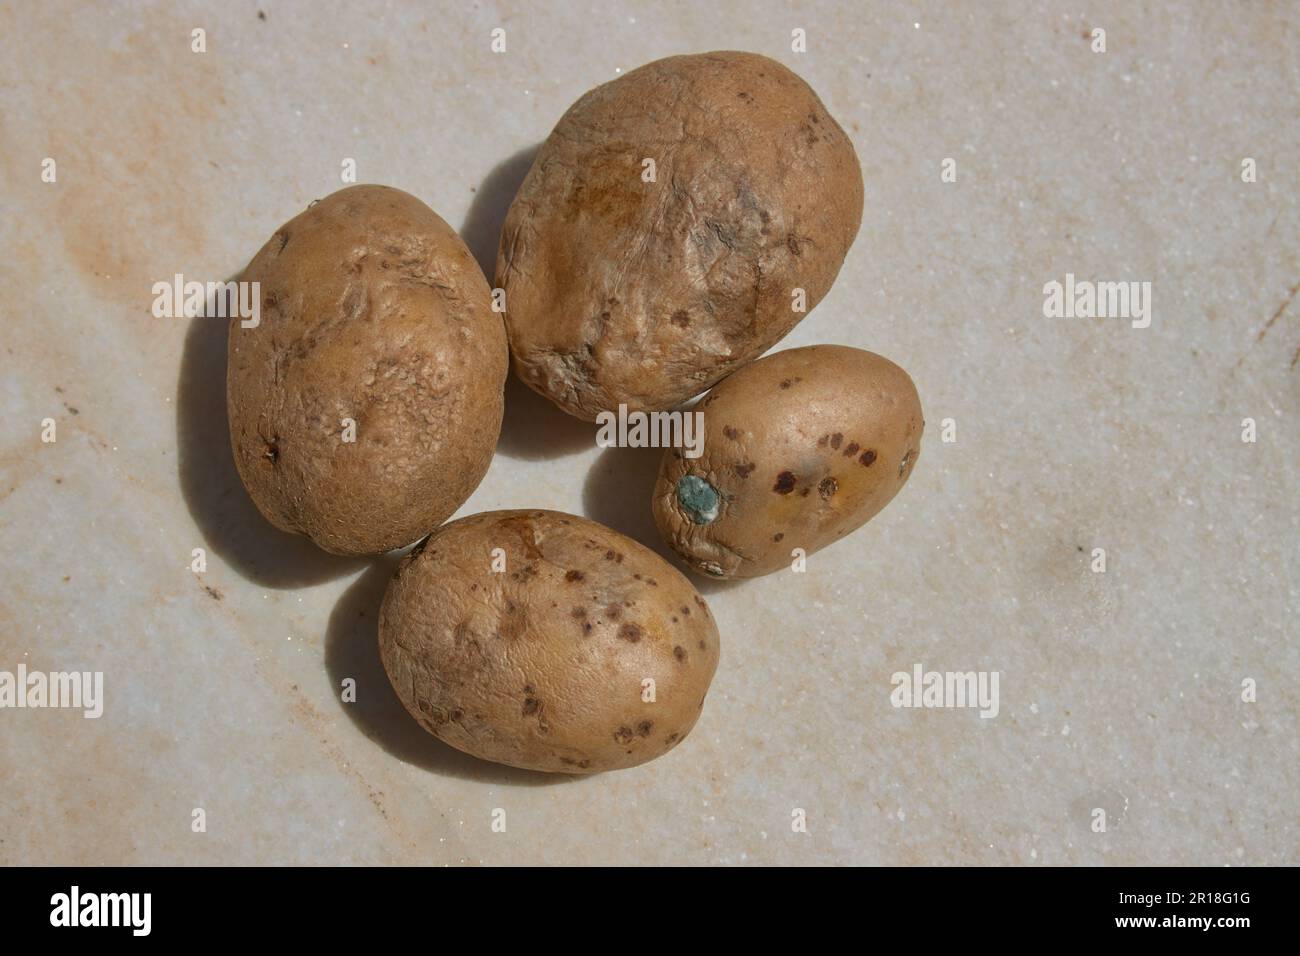 Close up of some potatoes that have gone bad and rotten and with unhealthy fungus. Potato without sprouts in the sun on old gray marble Stock Photo